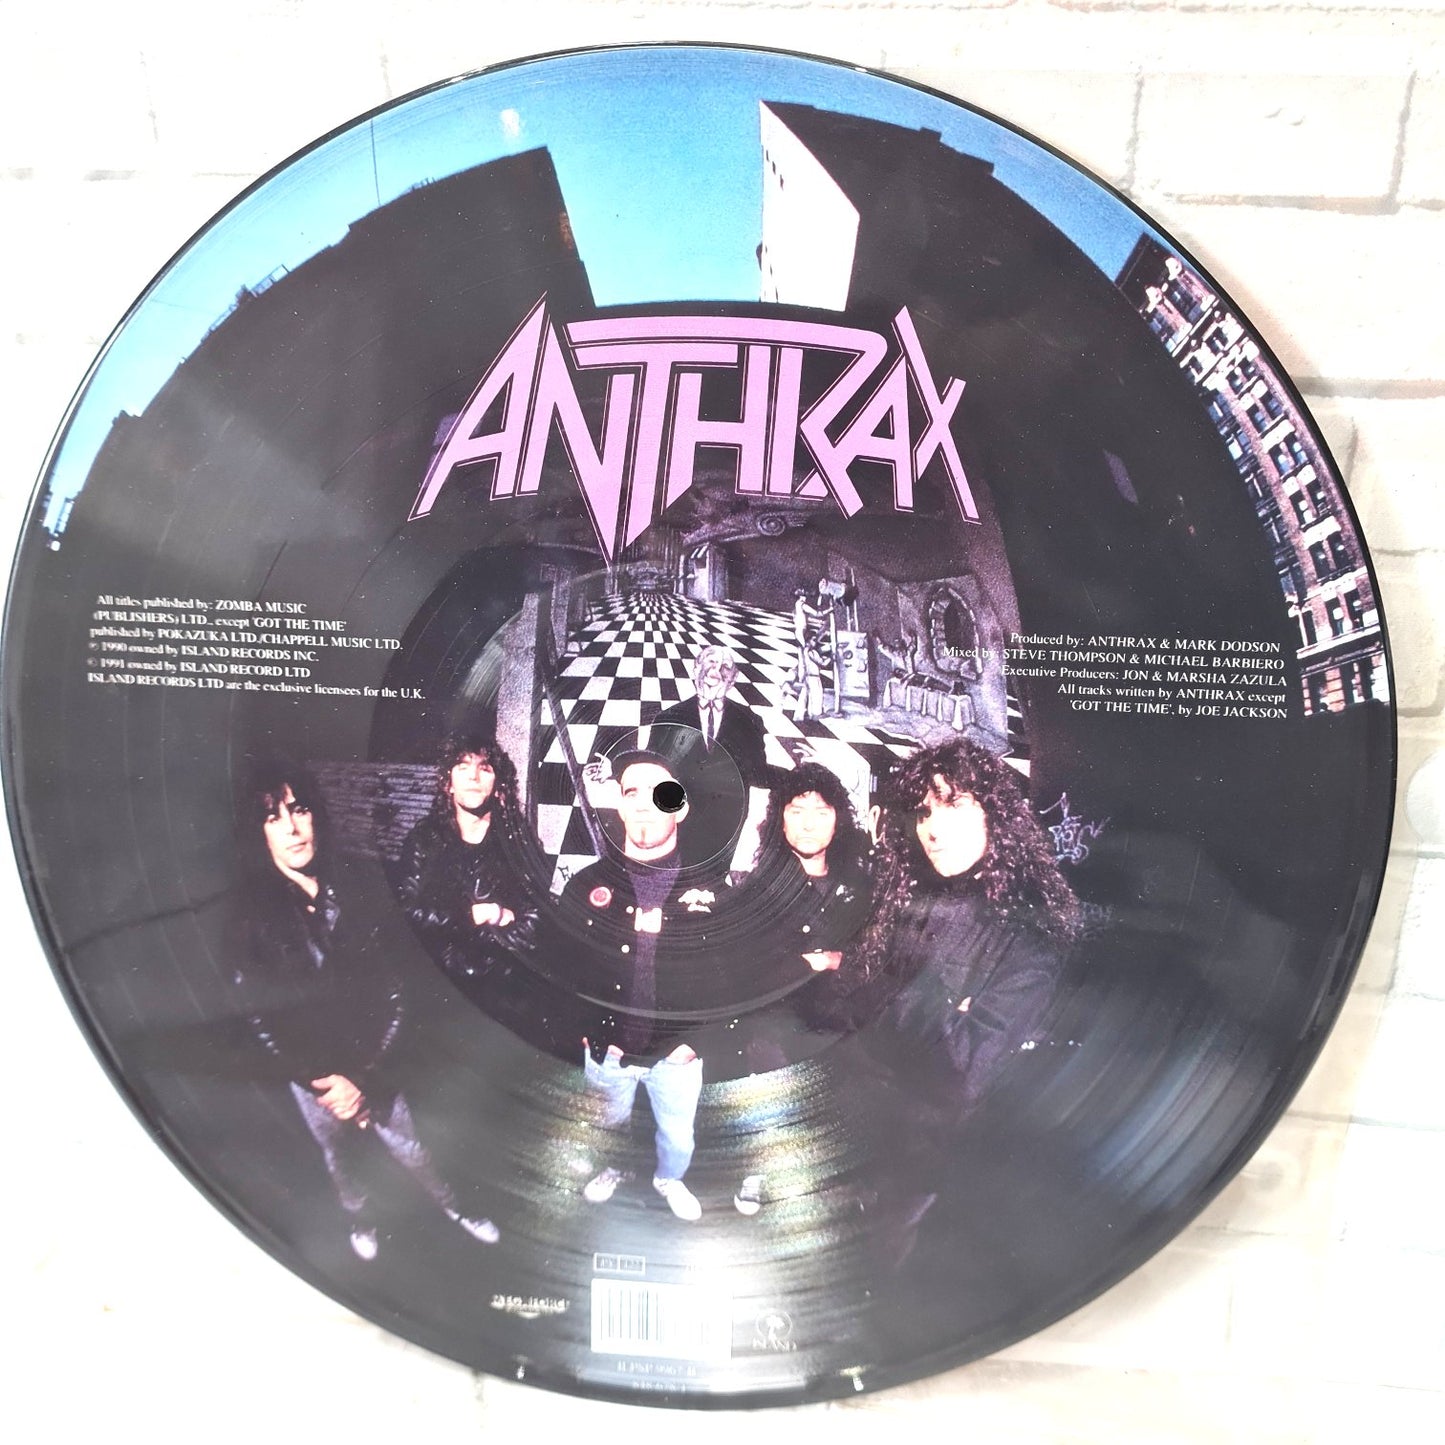 Anthrax - Persistence Of Time 12” Picture Disc Vinyl LP